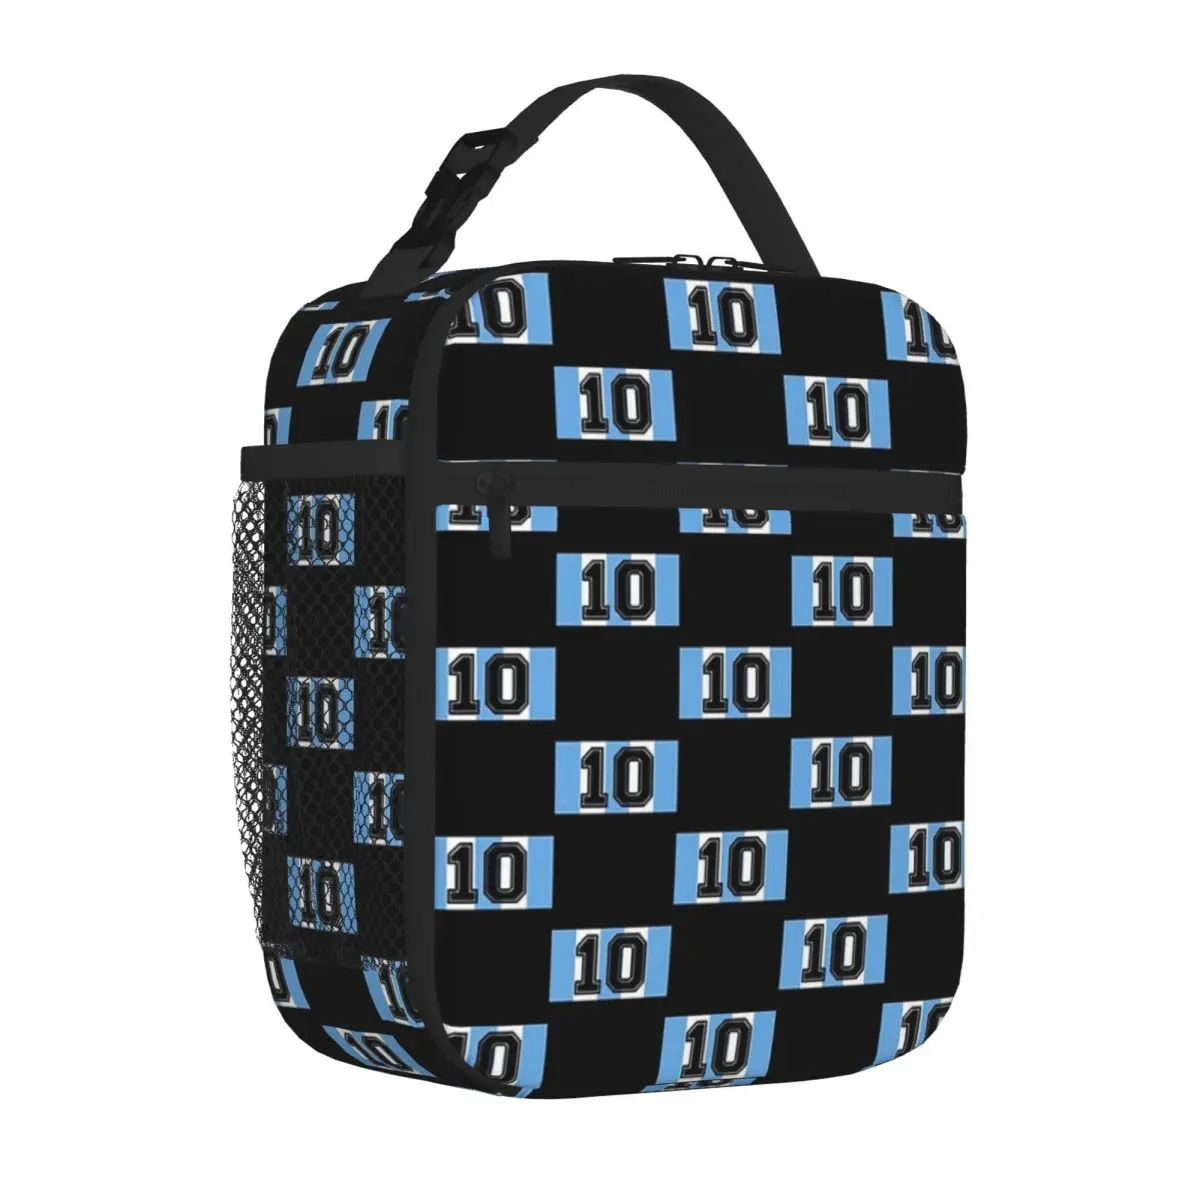 

Retro Argentina 10 Flag Football SoccerDiego Insulated Lunch Bags Thermal Bag Picnic Food Tote Bags for Woman Children School